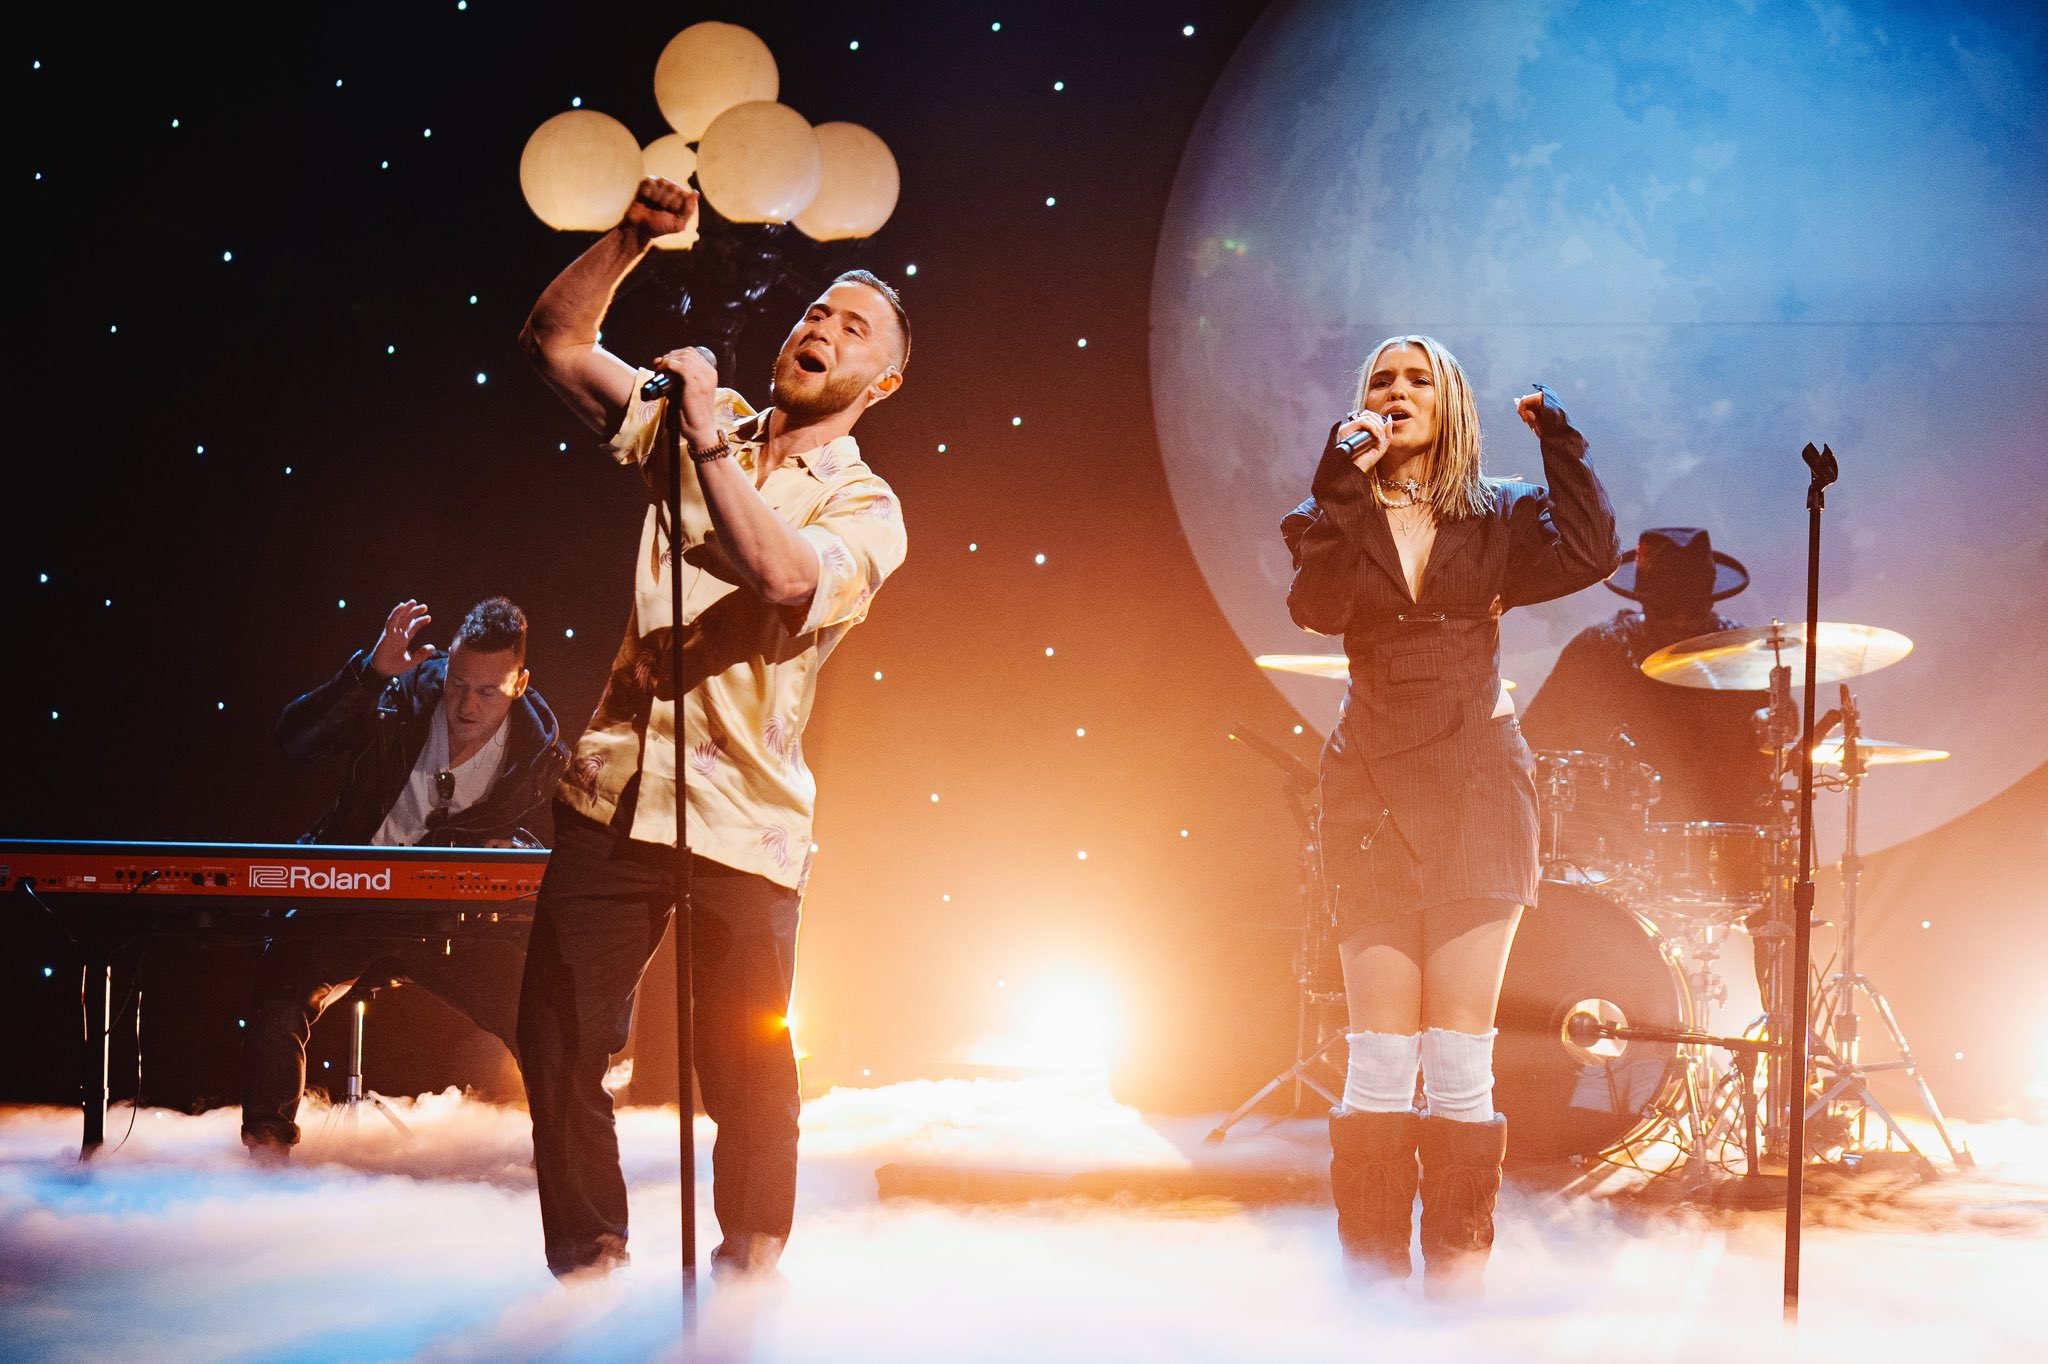 Mike Posner & Salem Ilese performed Howling At The Moon on The Late Late Show with James Corden on February 6, 2023